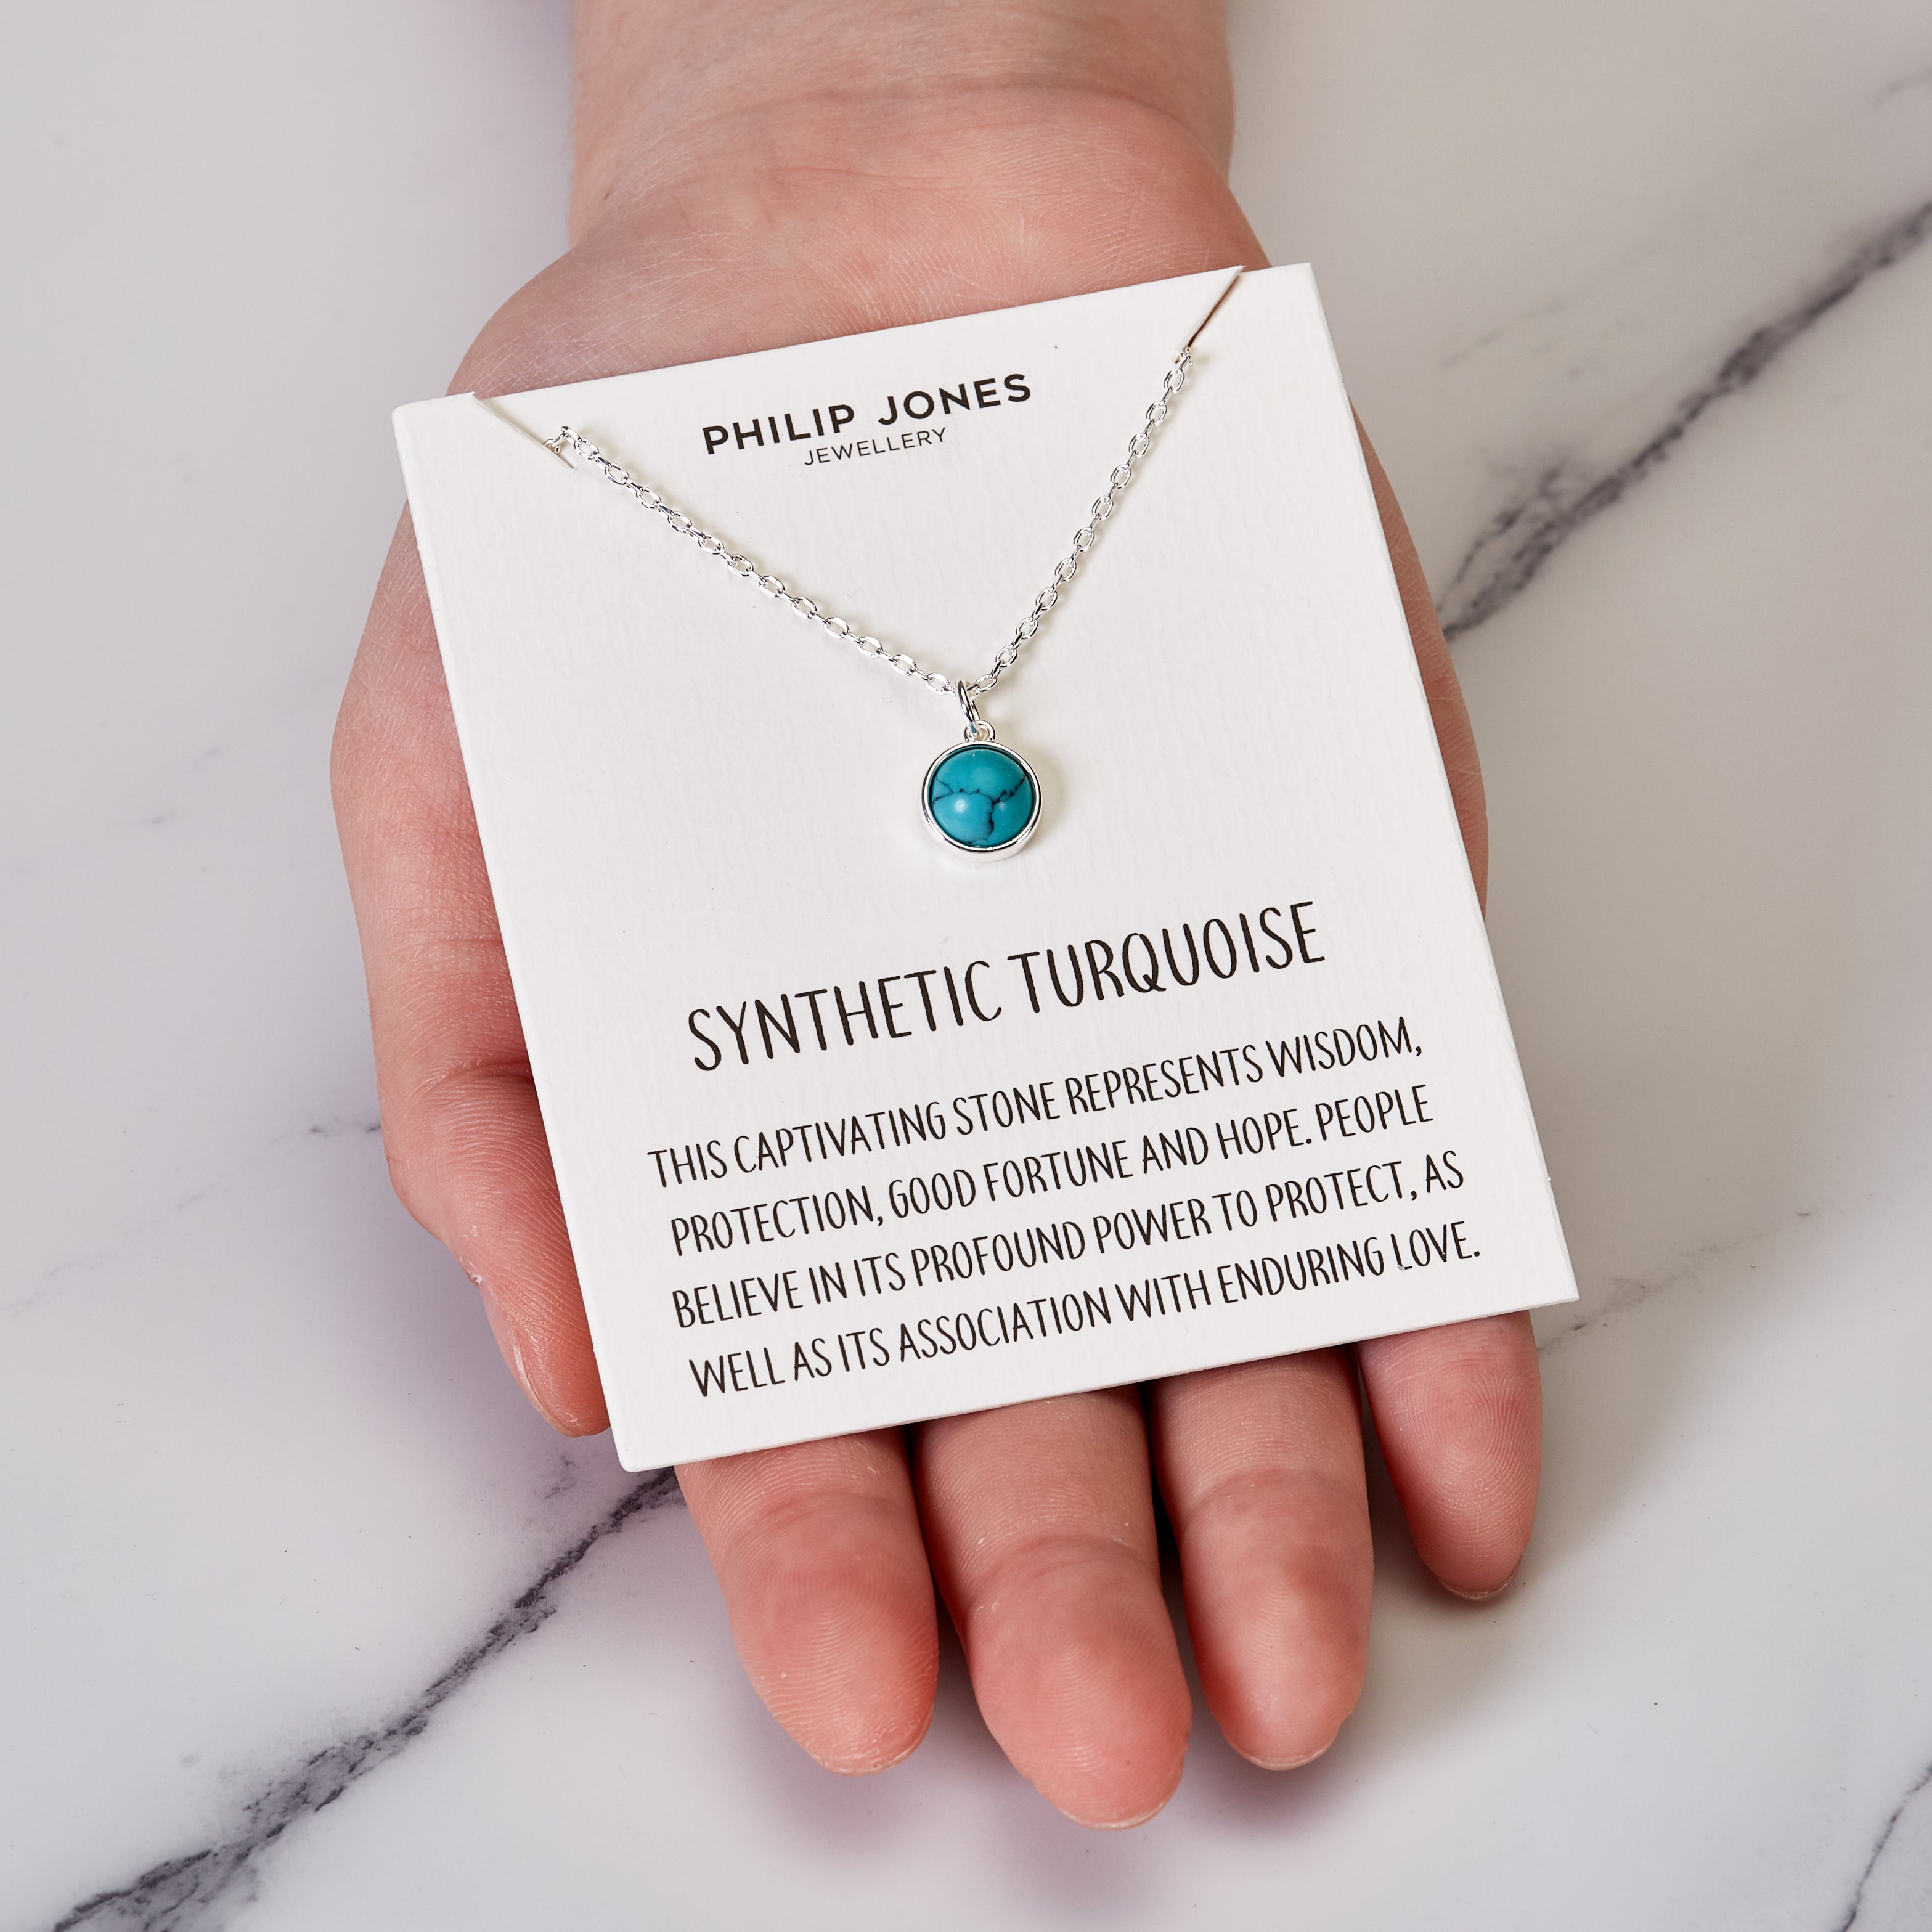 Synthetic Turquoise Necklace with Quote Card